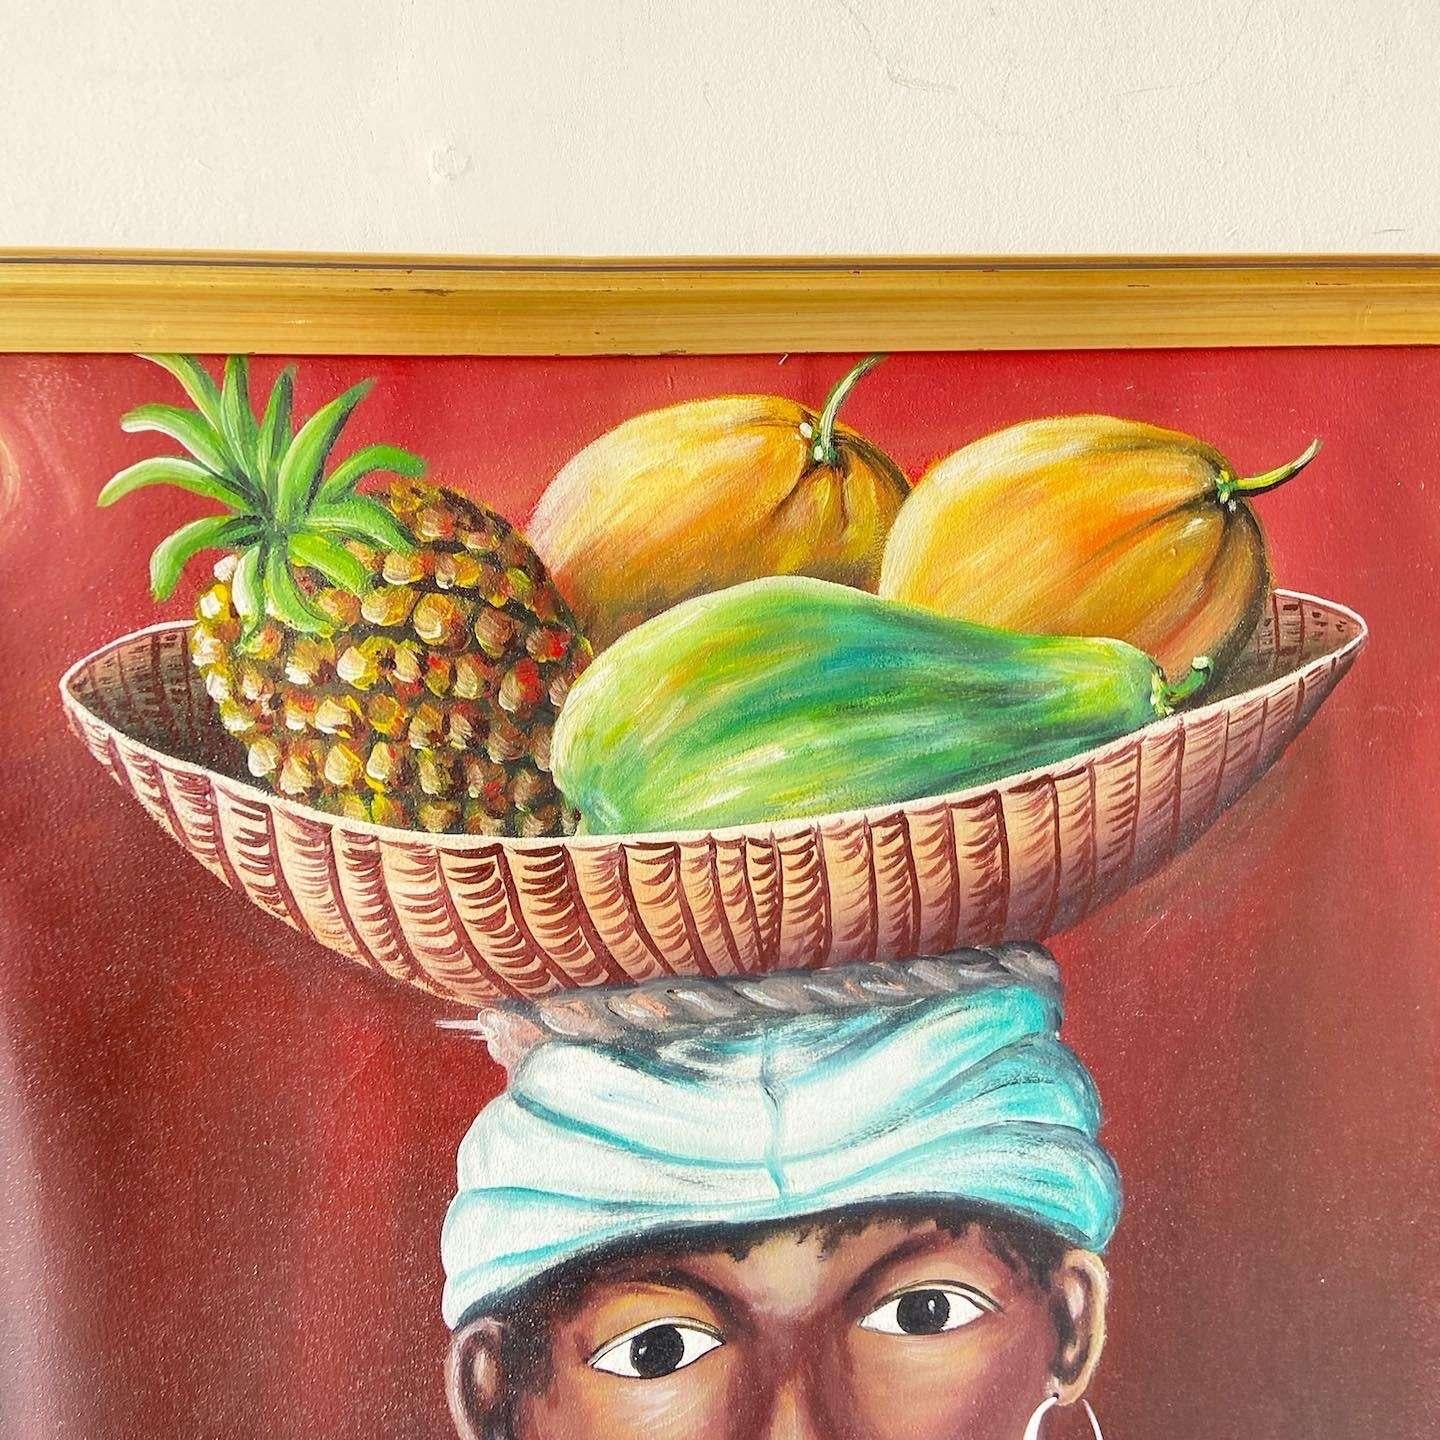 Original Framed Oil Painting of Caribbean Woman With Fruit Bowl by Scroggin 2